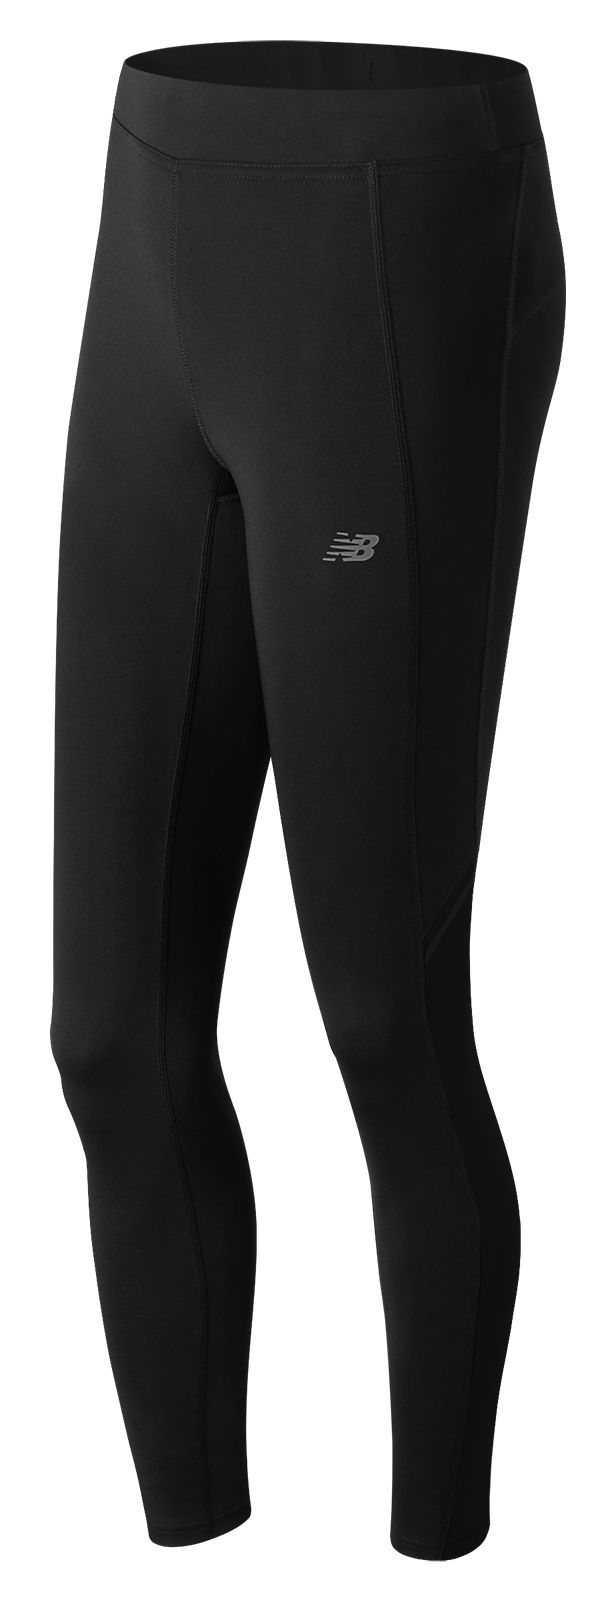 Accelerate Tight - Women's 63132 - Pants, Performance - New Balance